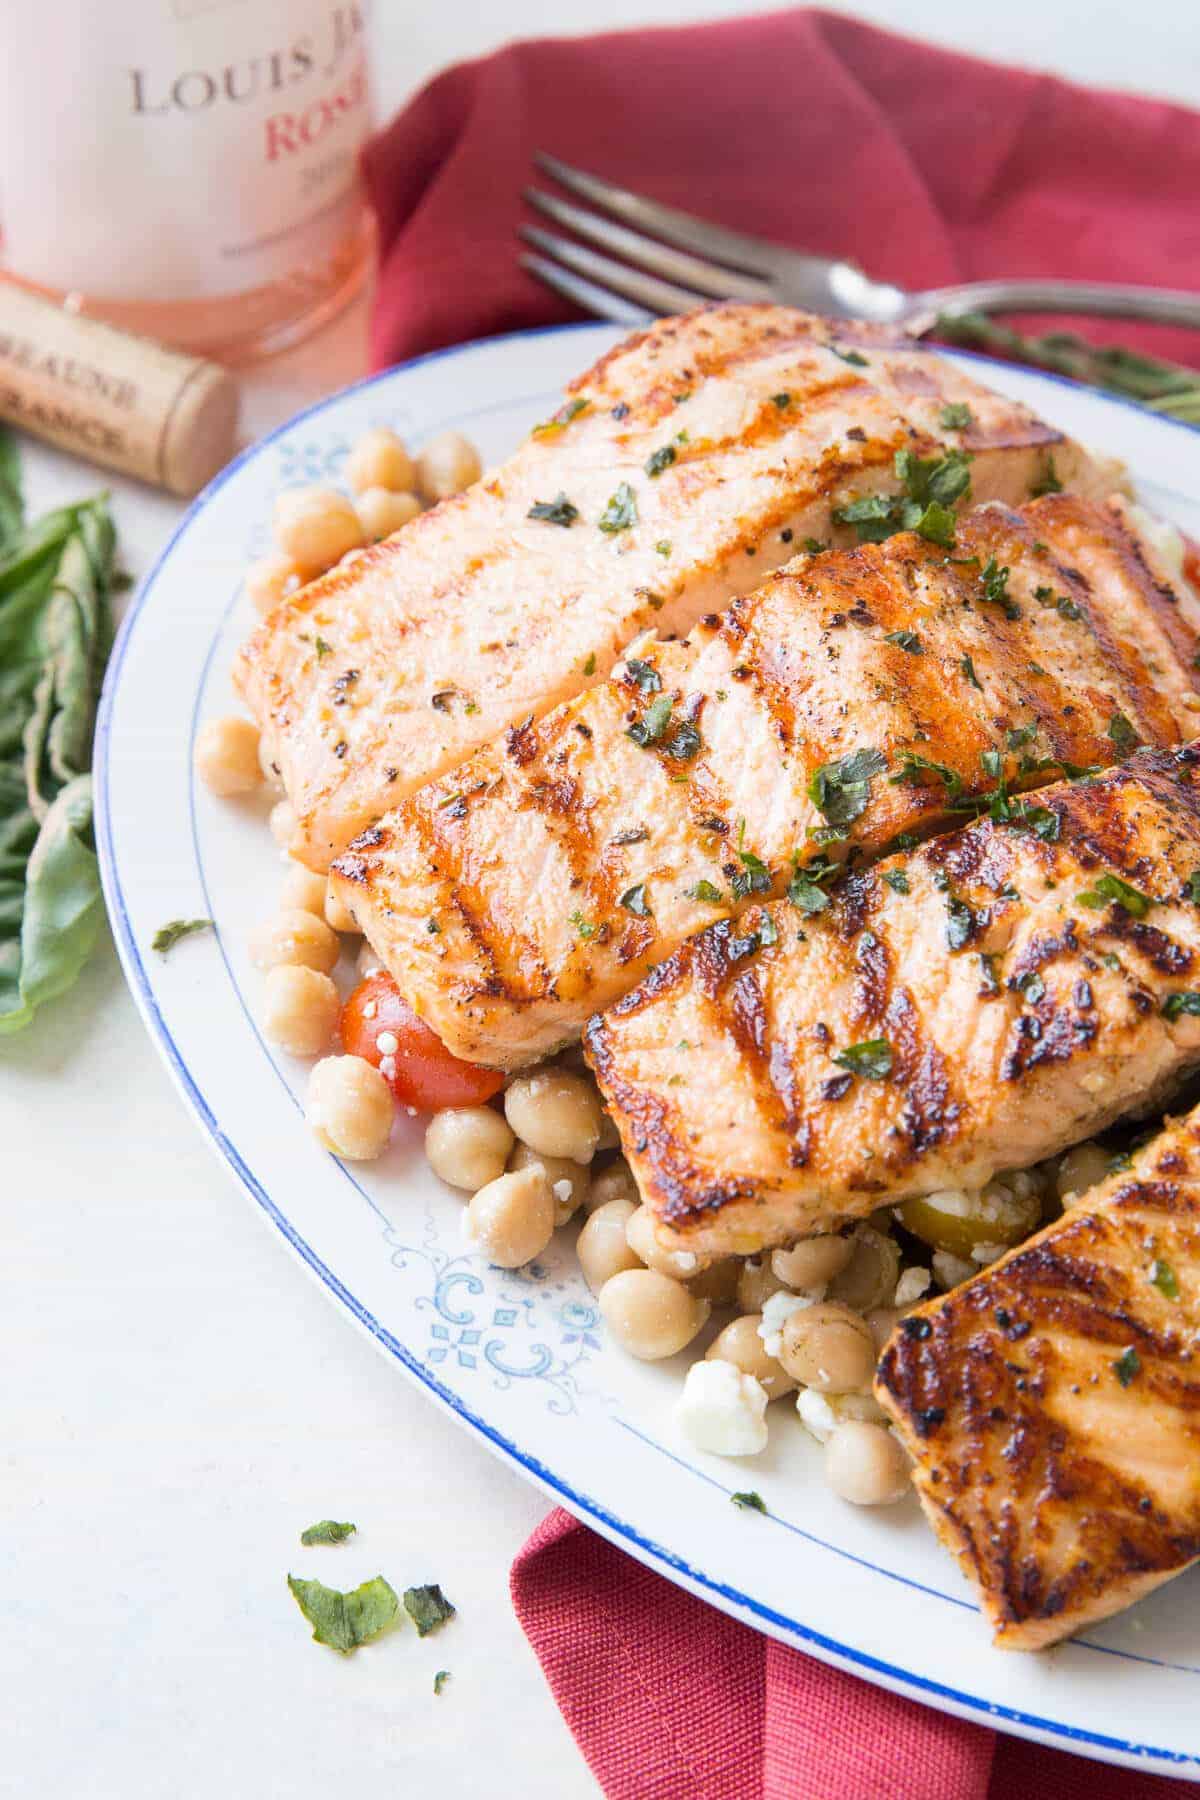 This is an easy way to enjoy salmon on the grill. It is loaded with flavor and so simple!